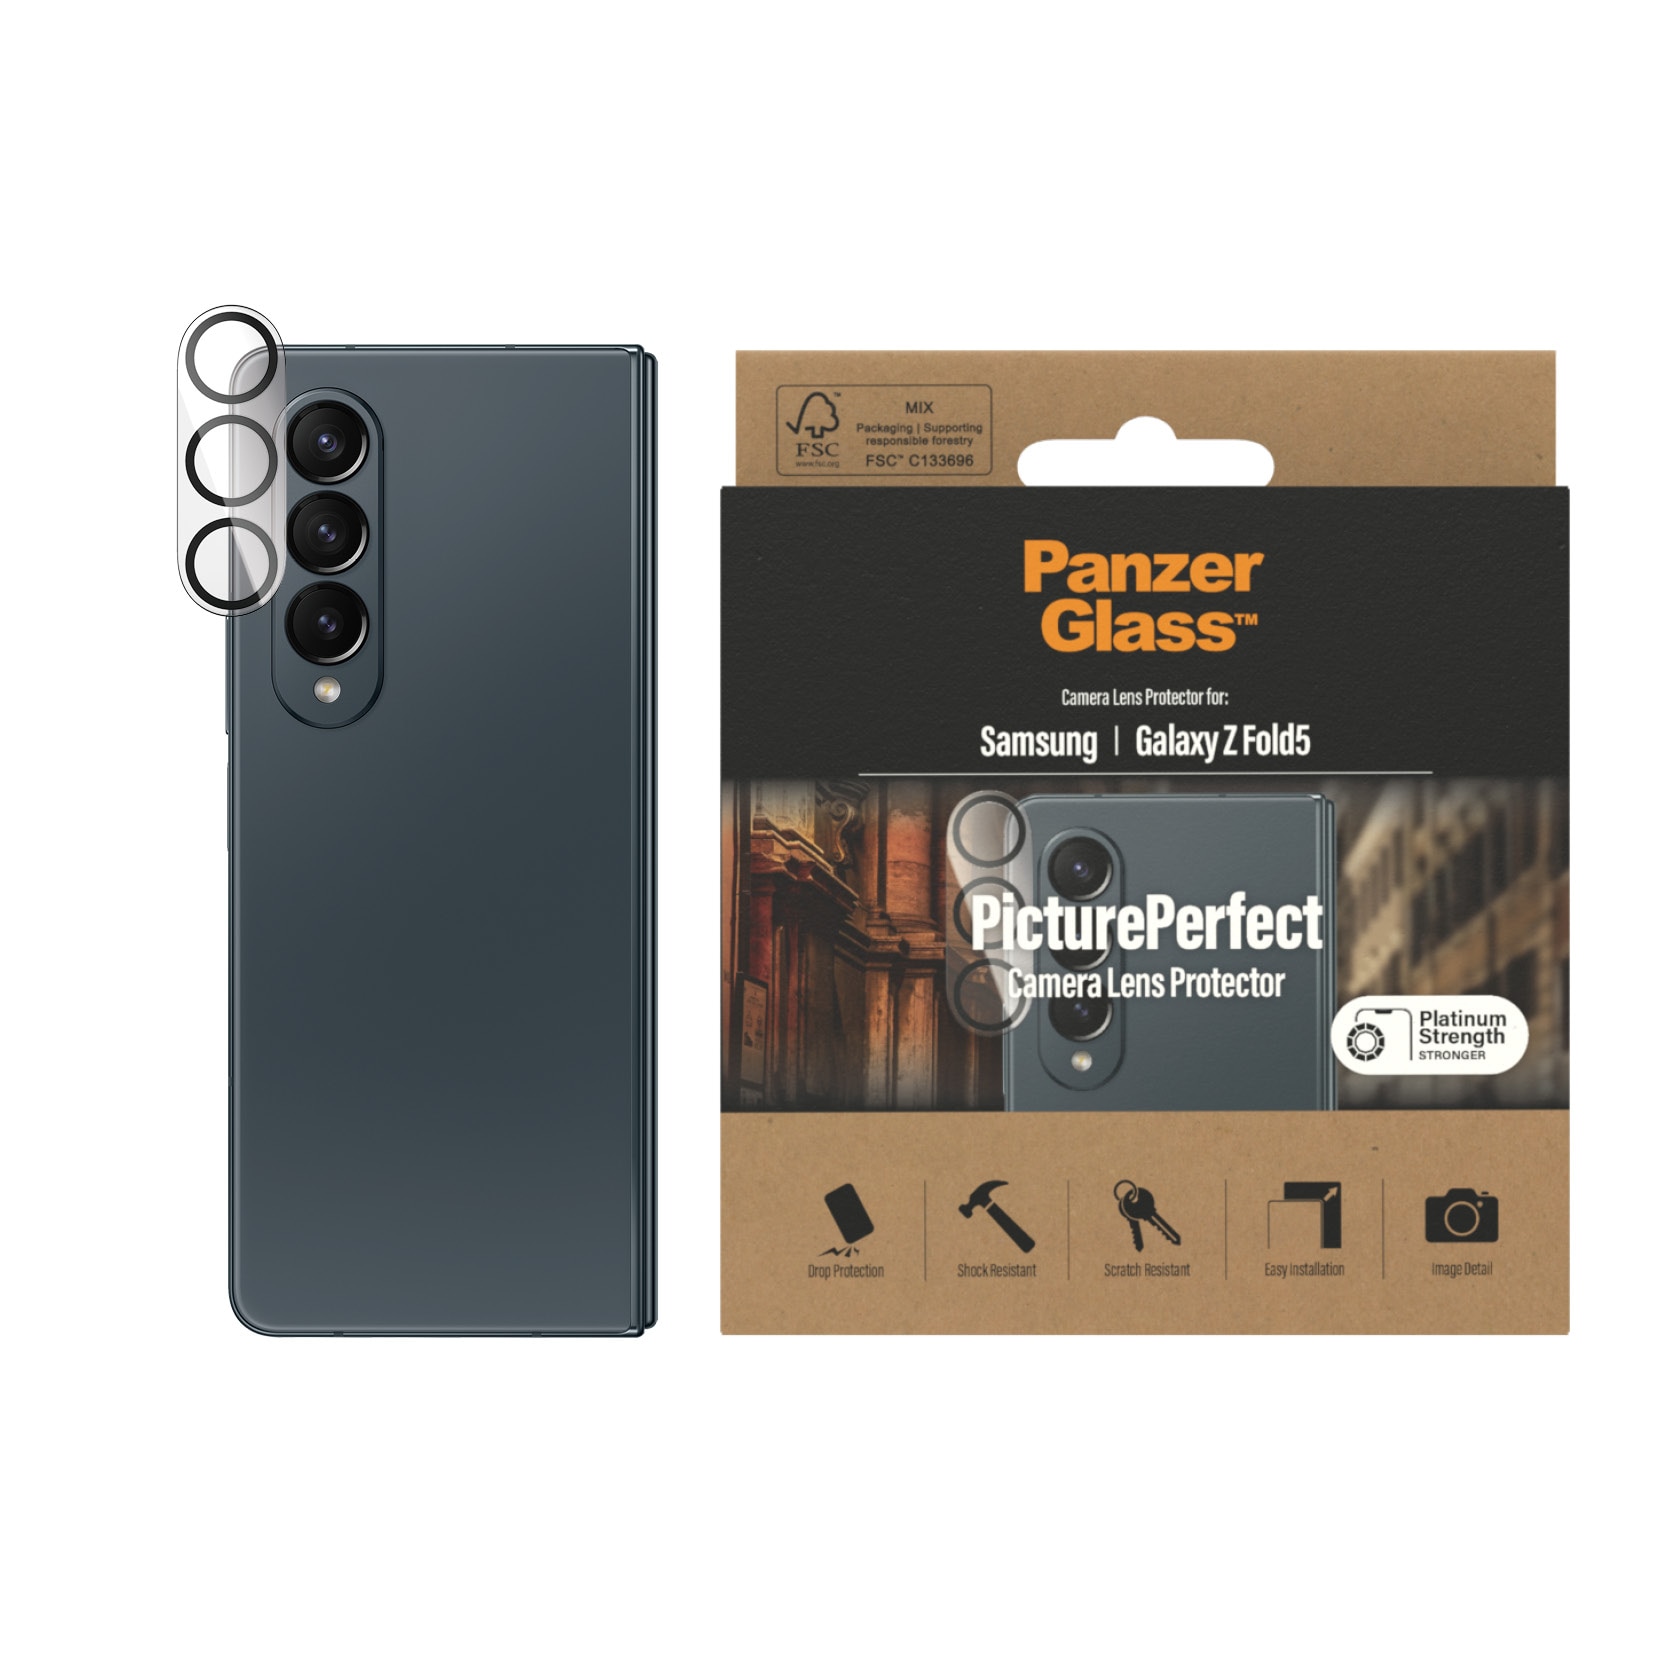 PanzerGlass PicturePerfect Camera Lens Protector Samsung Galaxy S24 Ultra